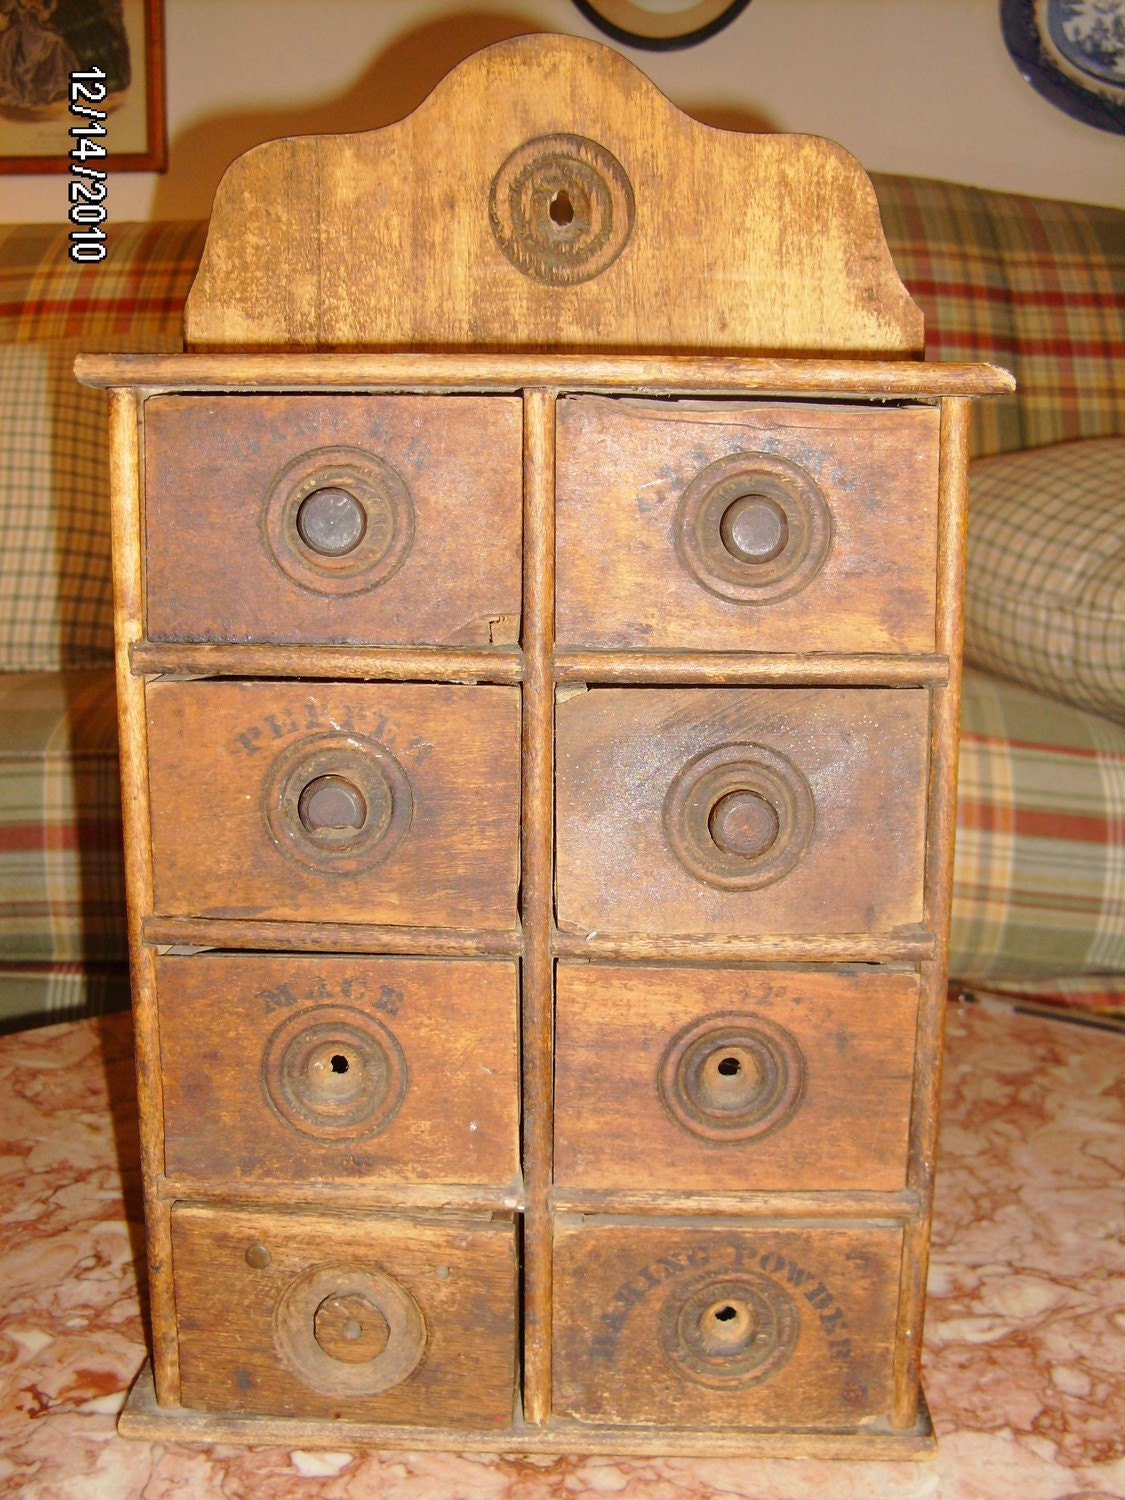 Antique Wood Spice Rack Cabinet Wall mount 8 drawers